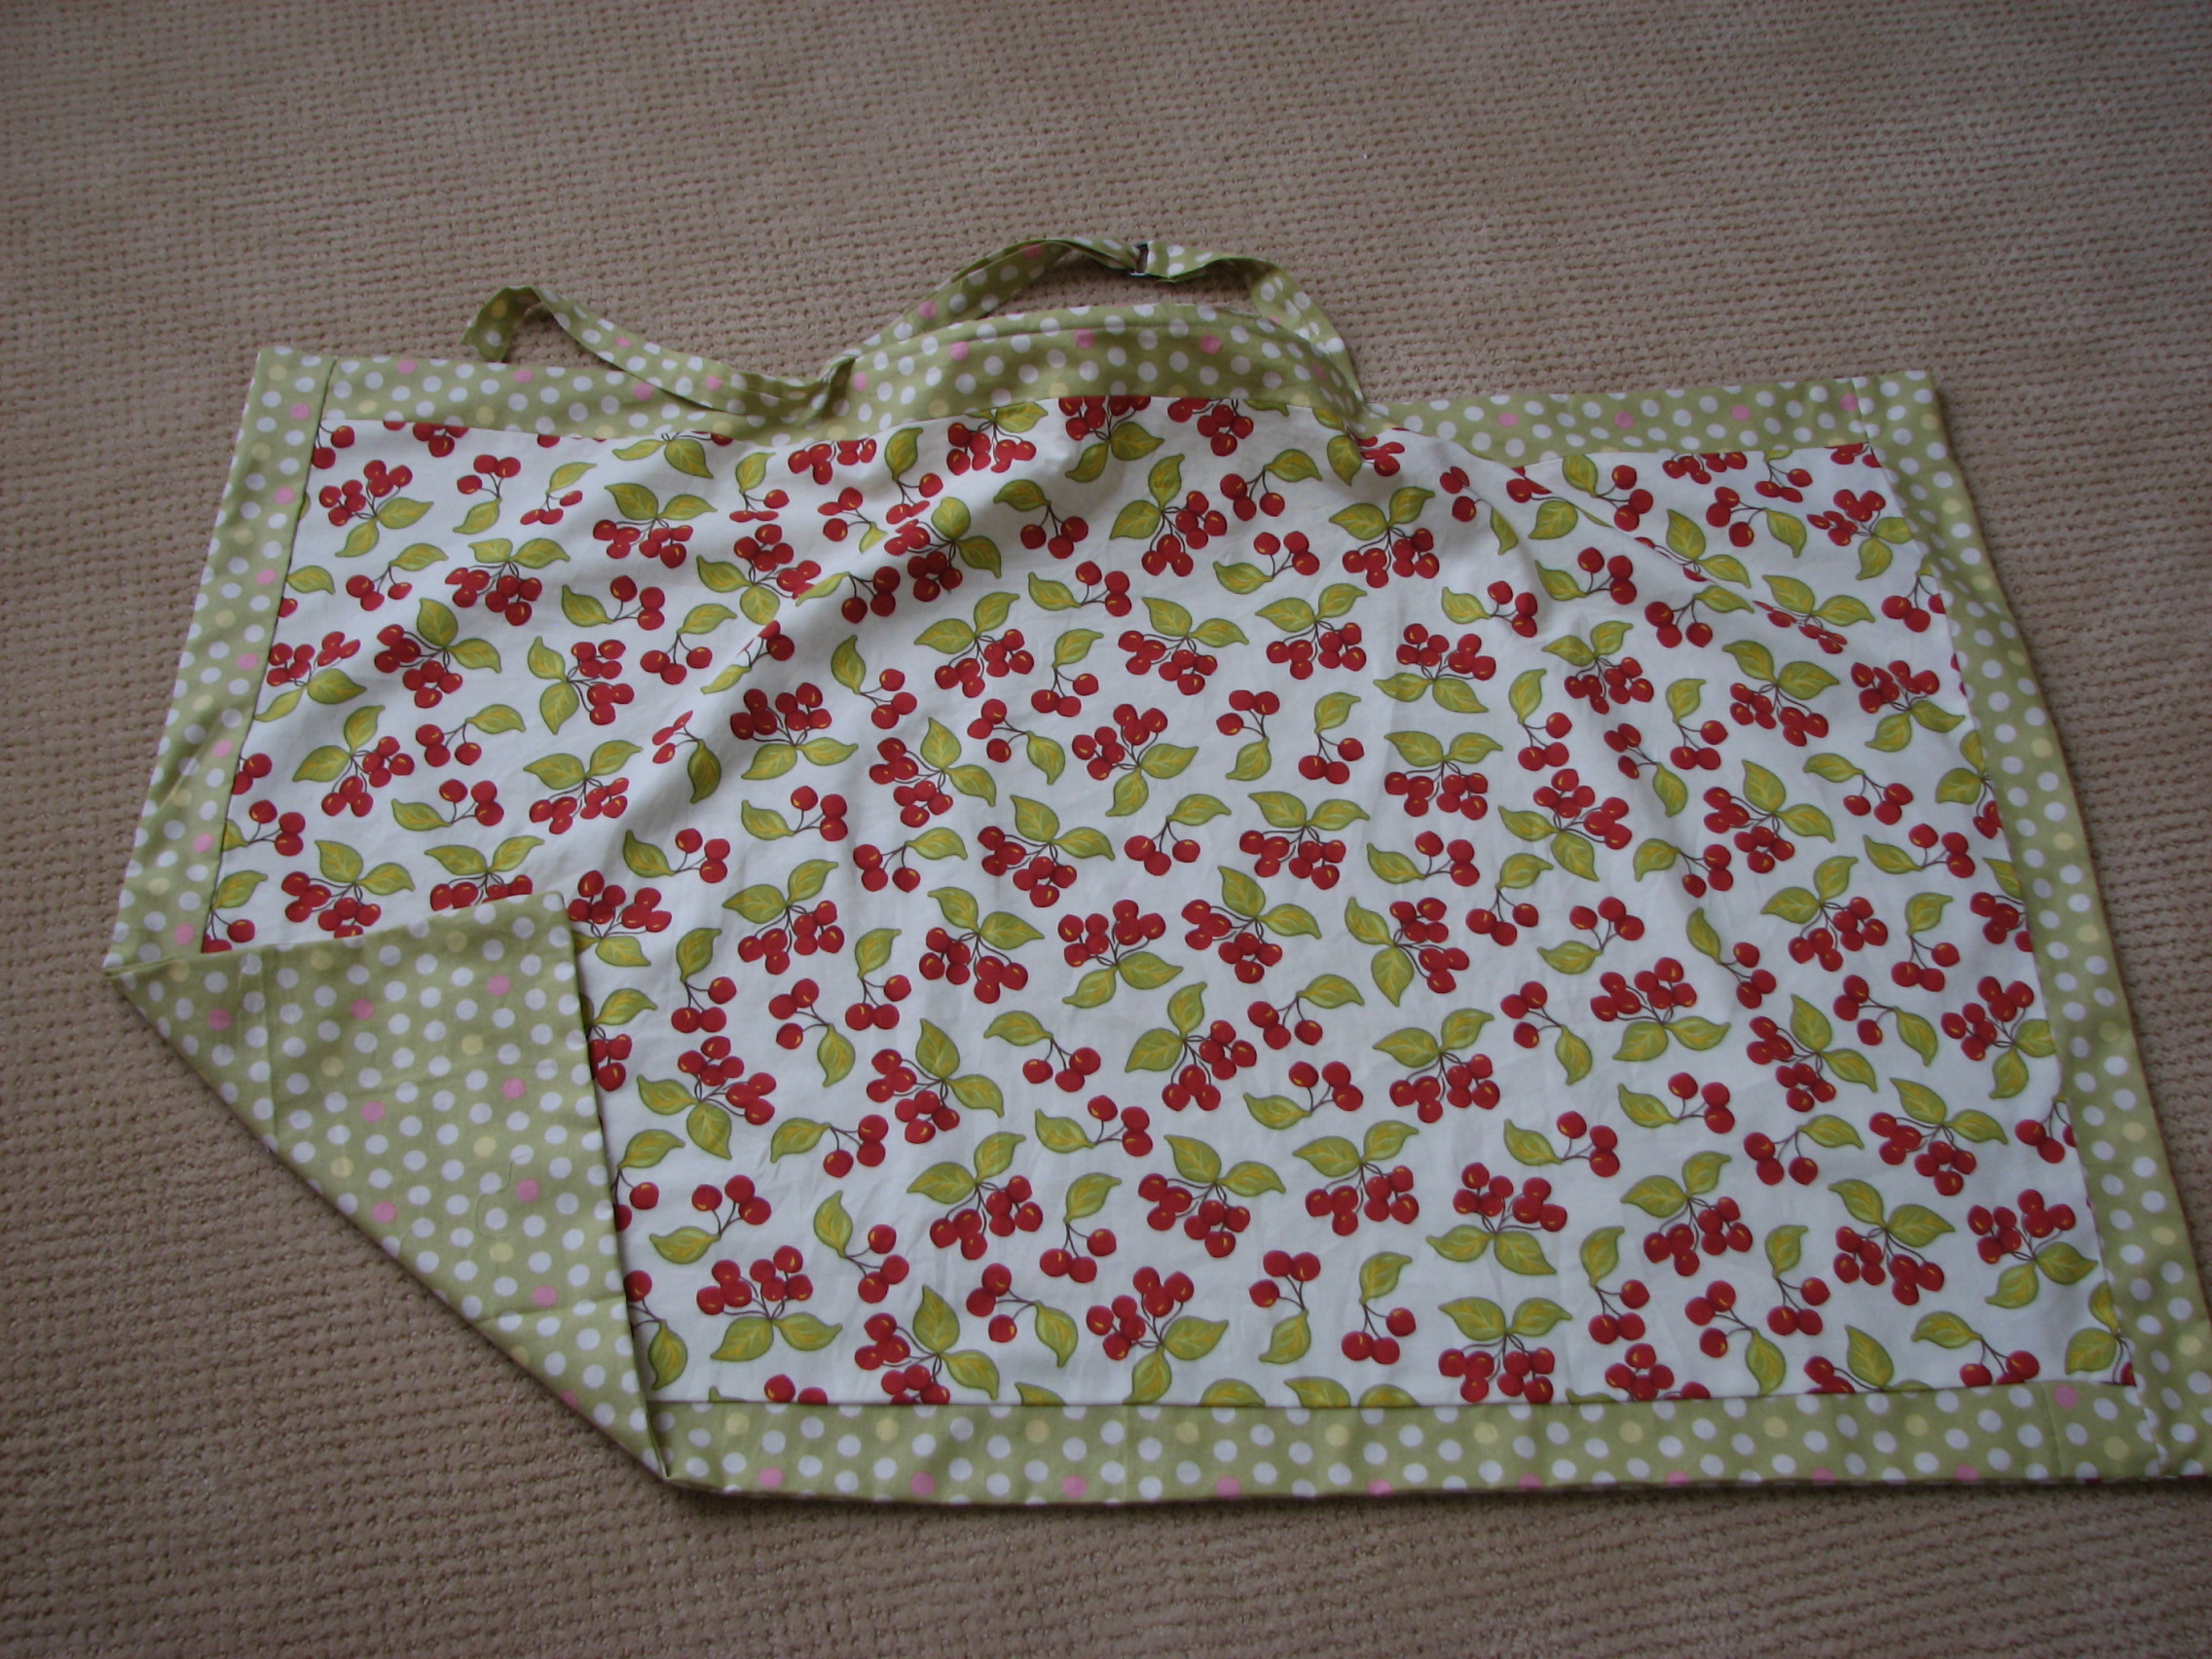 Creative Sewing &gt;&gt; Nursing/breastsfeeding cover up